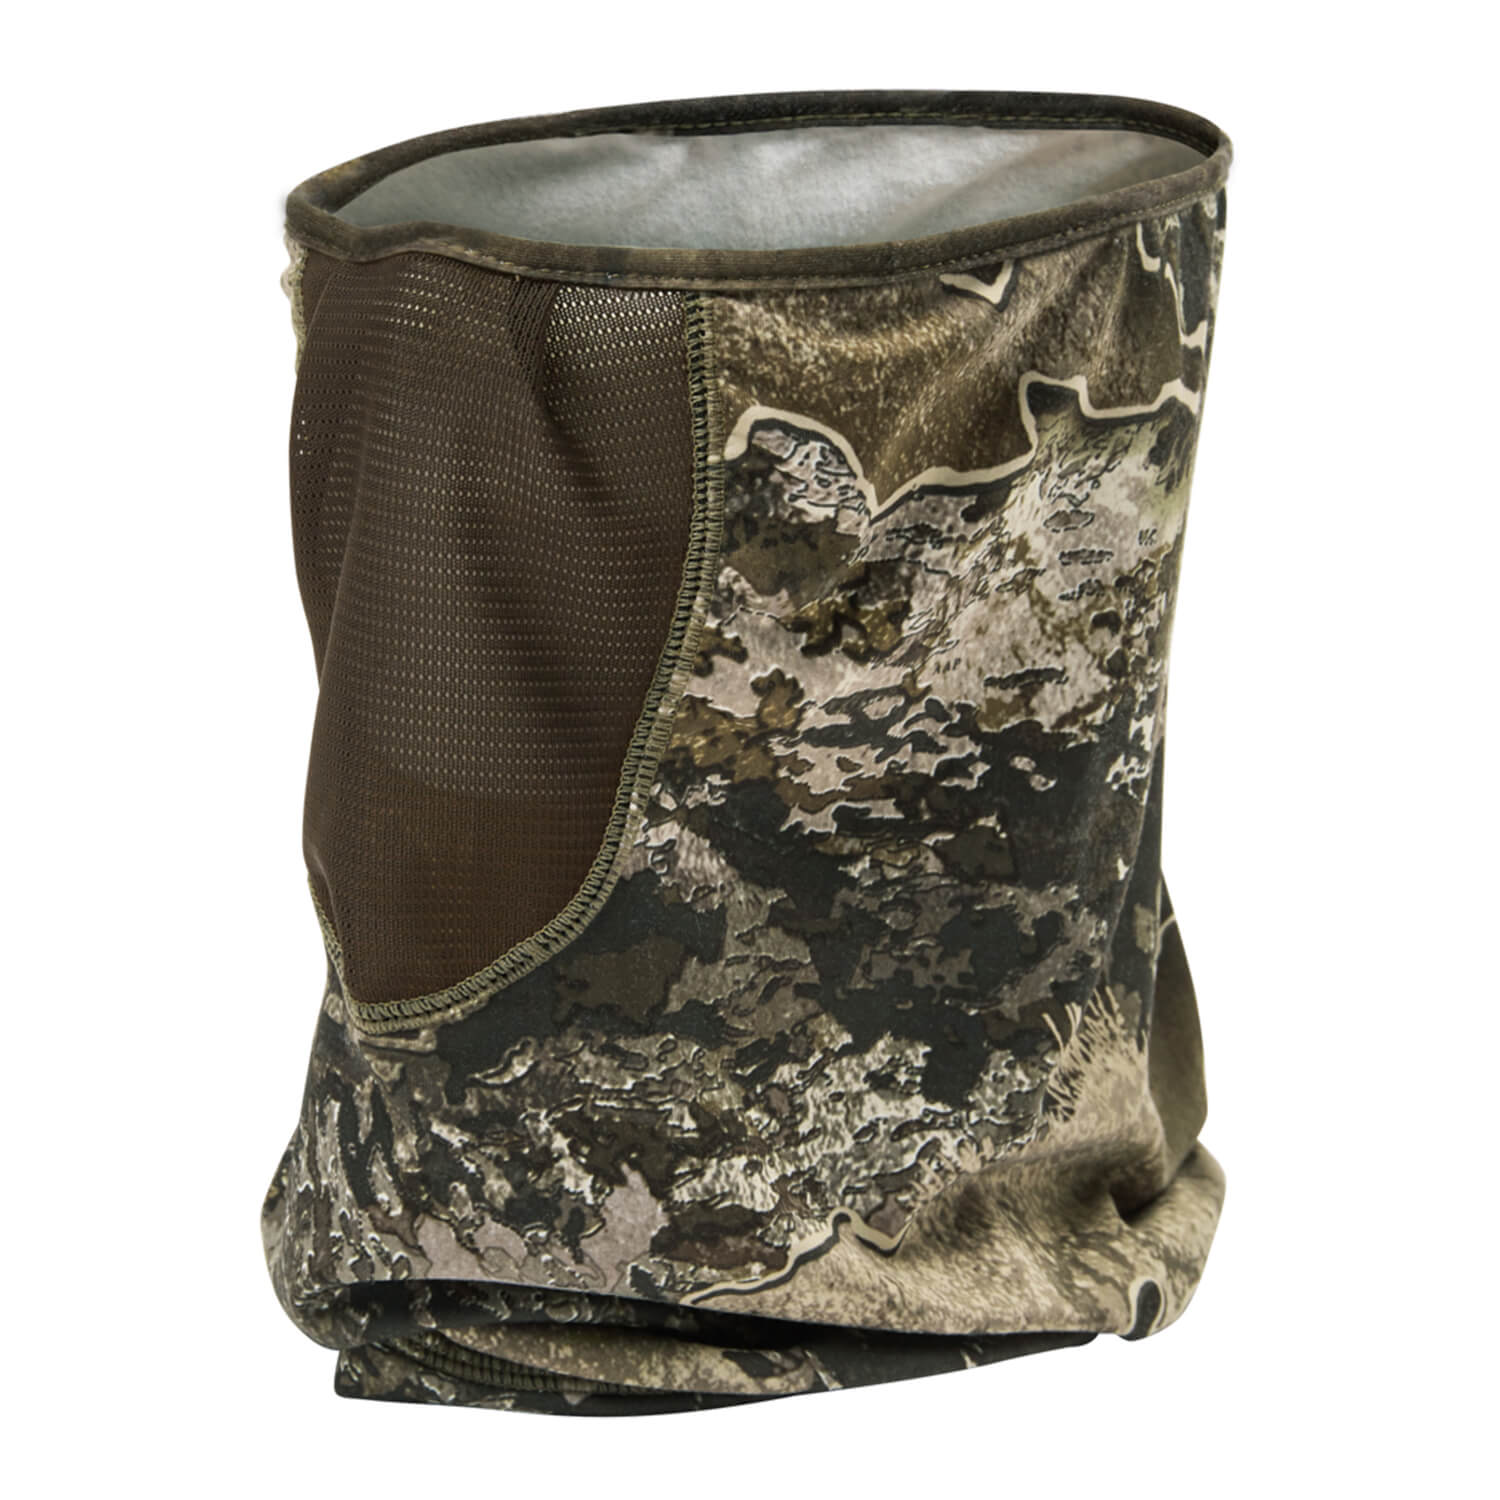 Deerhunter Facemask Excape (Realtree Excape) - Scarf & Neck Warmer